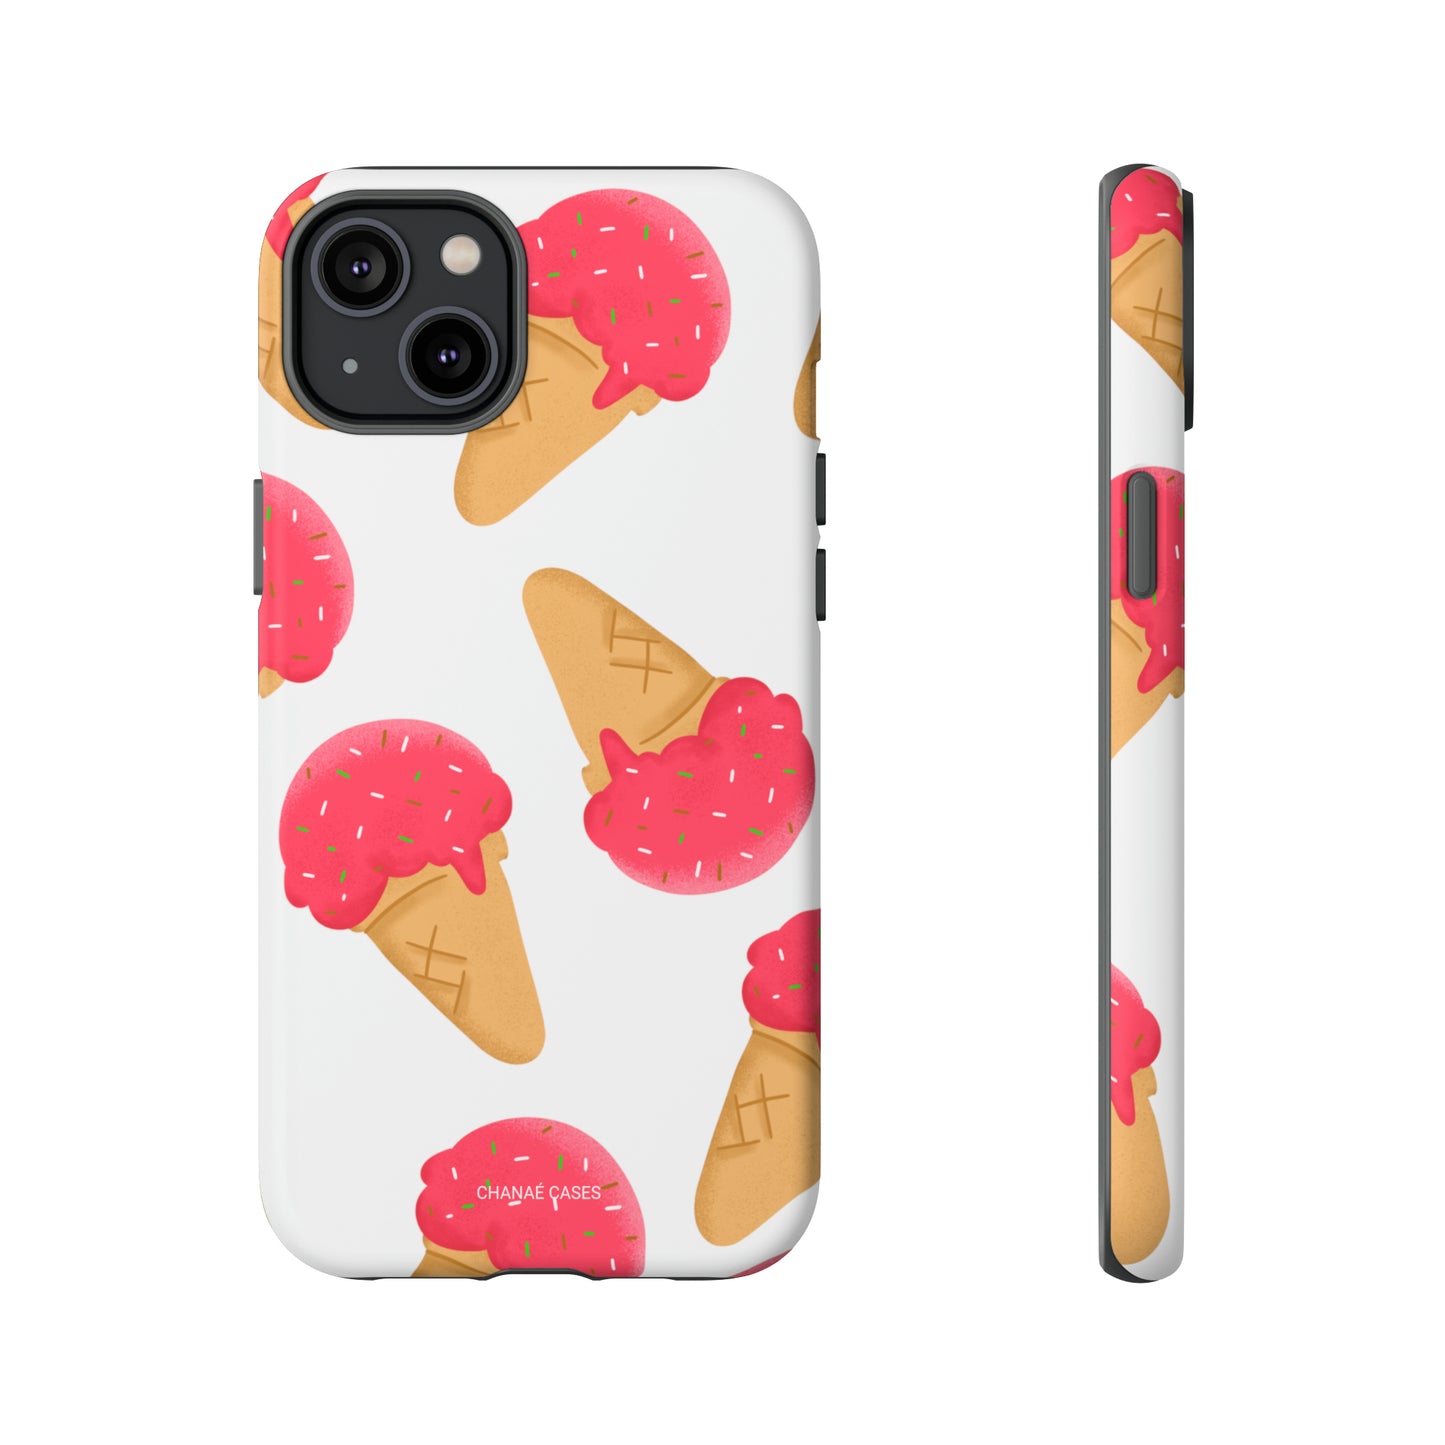 One Scoop Please! iPhone "Tough" Case (White)